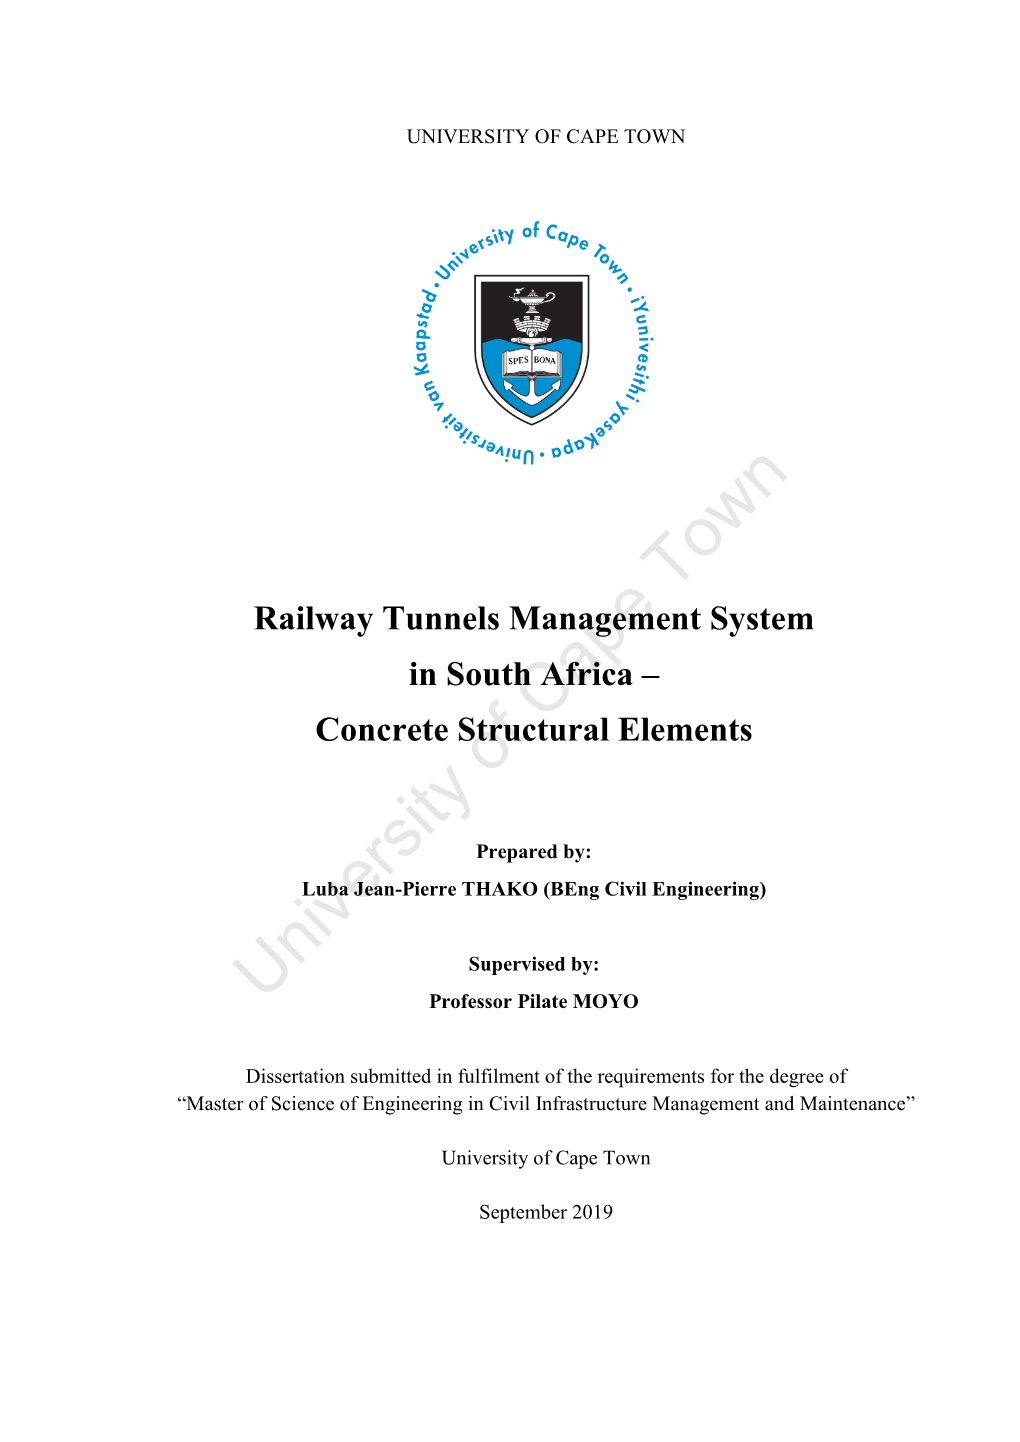 Railway Tunnels Management System in South Africa – Concrete Structural Elements 1-2